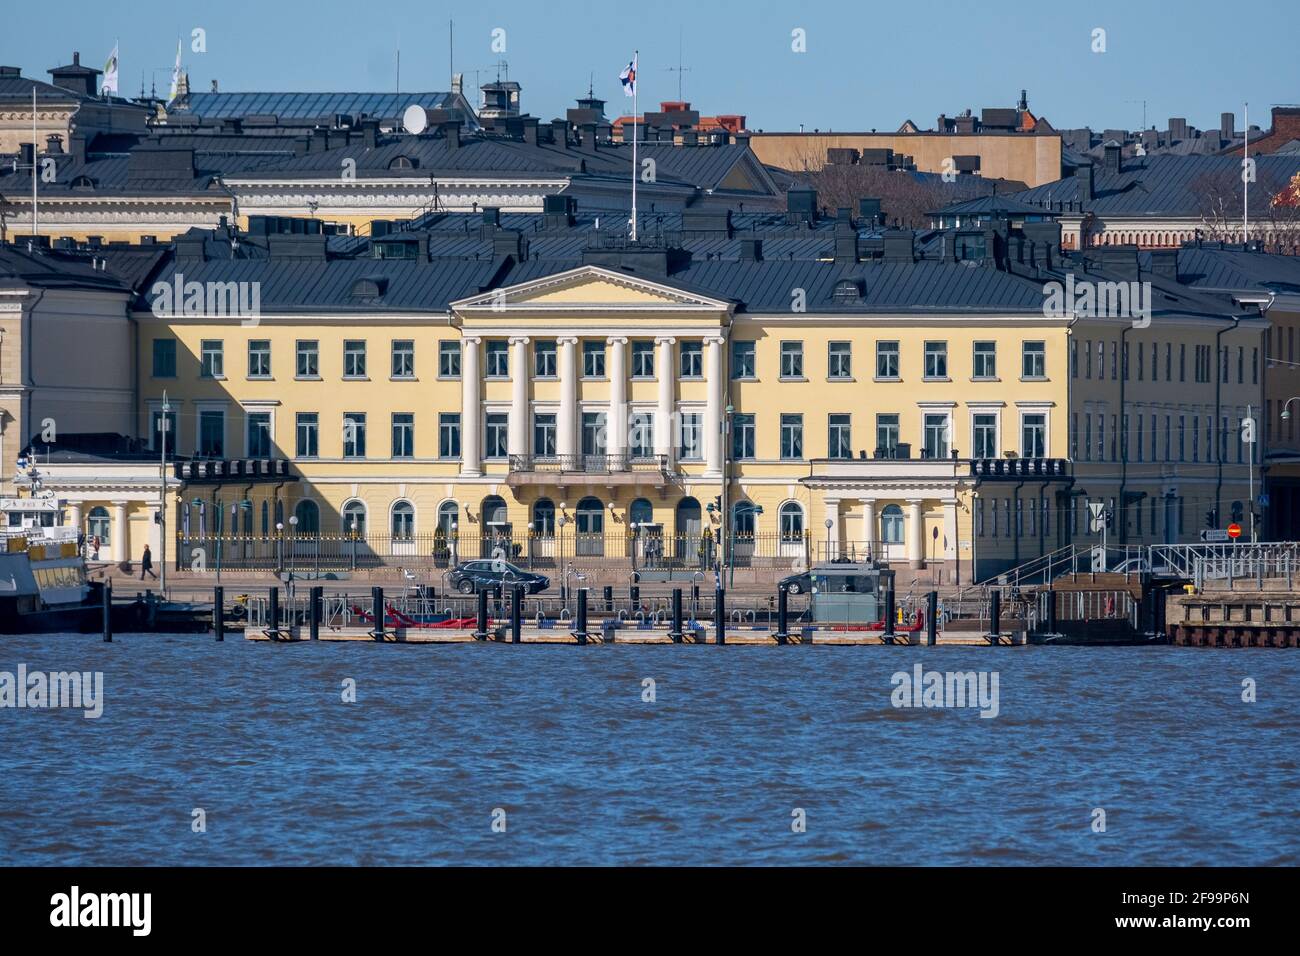 Helsinki / Finland - APRIL 16, 2021: The exterior of the Finnish presidential palace on a sunny summer day. Stock Photo